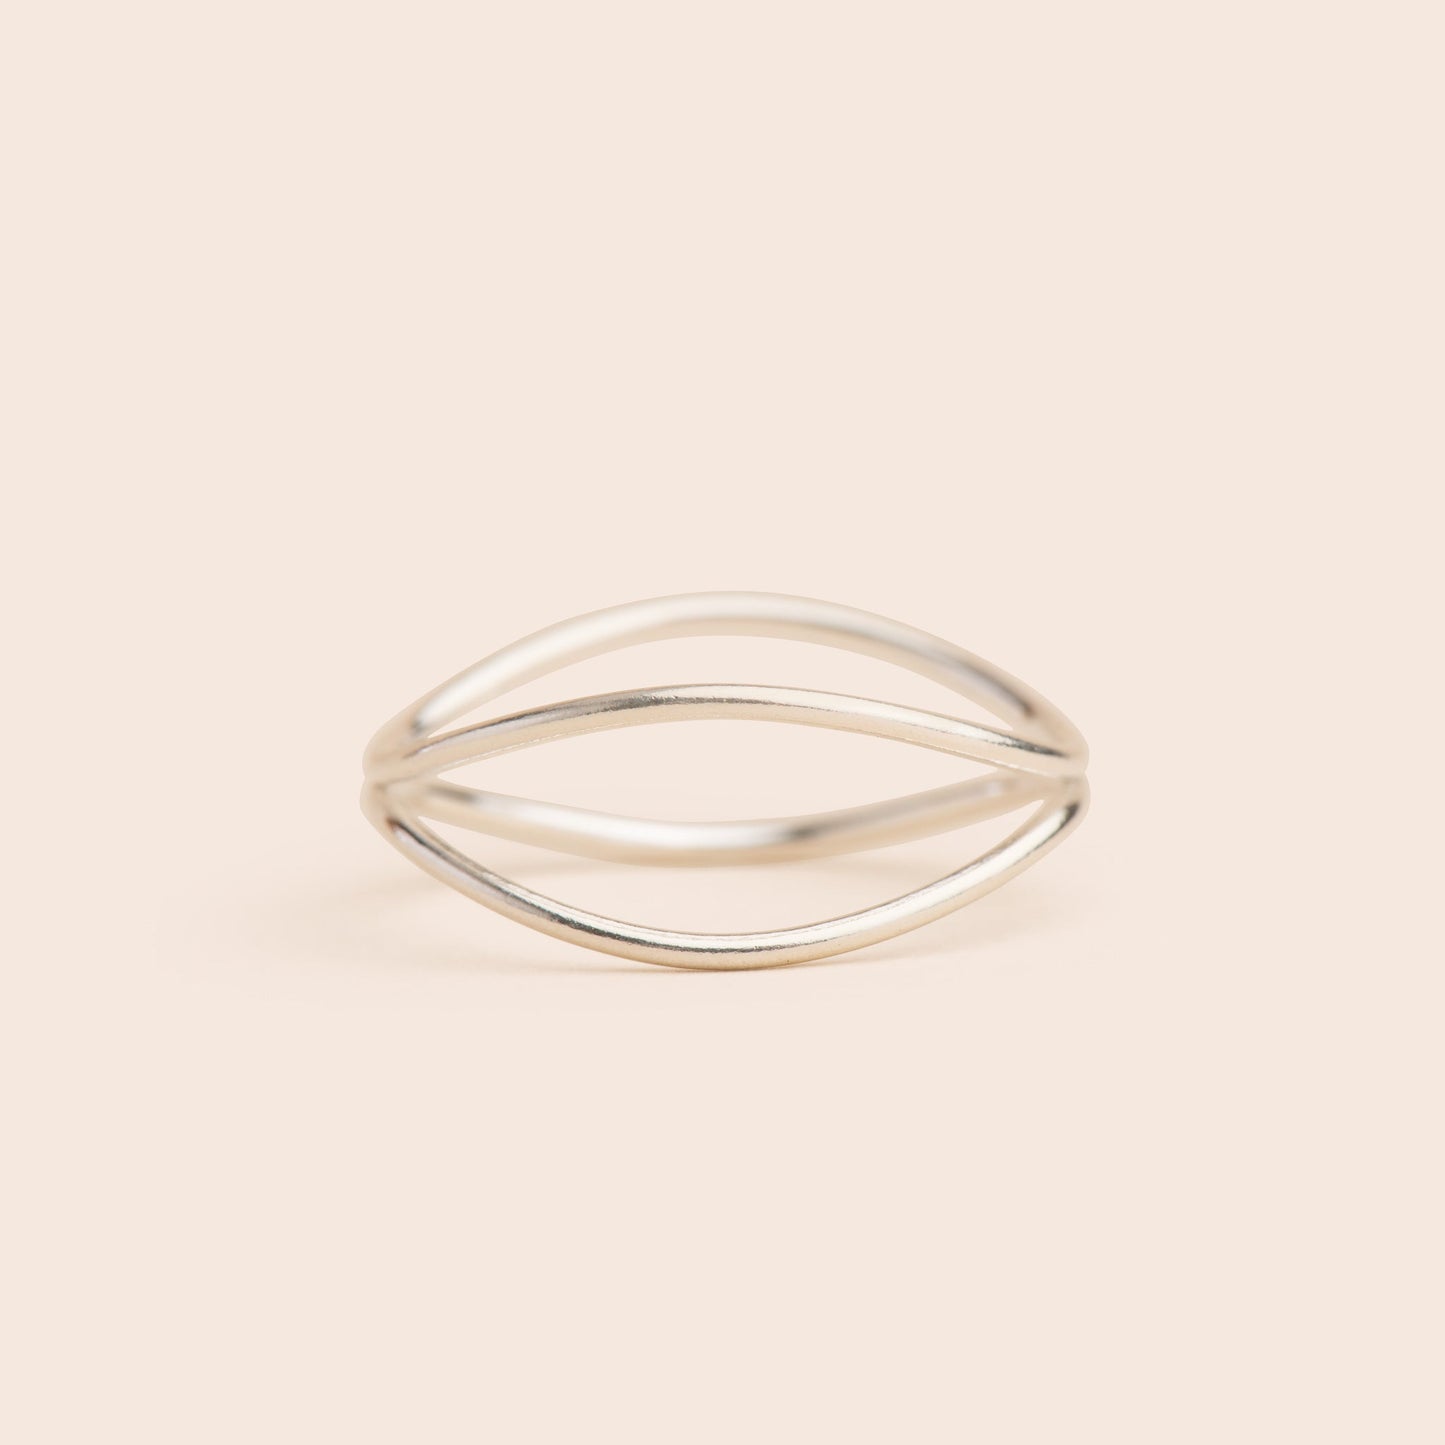 Criss Cross - Sterling Silver Stacking Ring - Gemlet